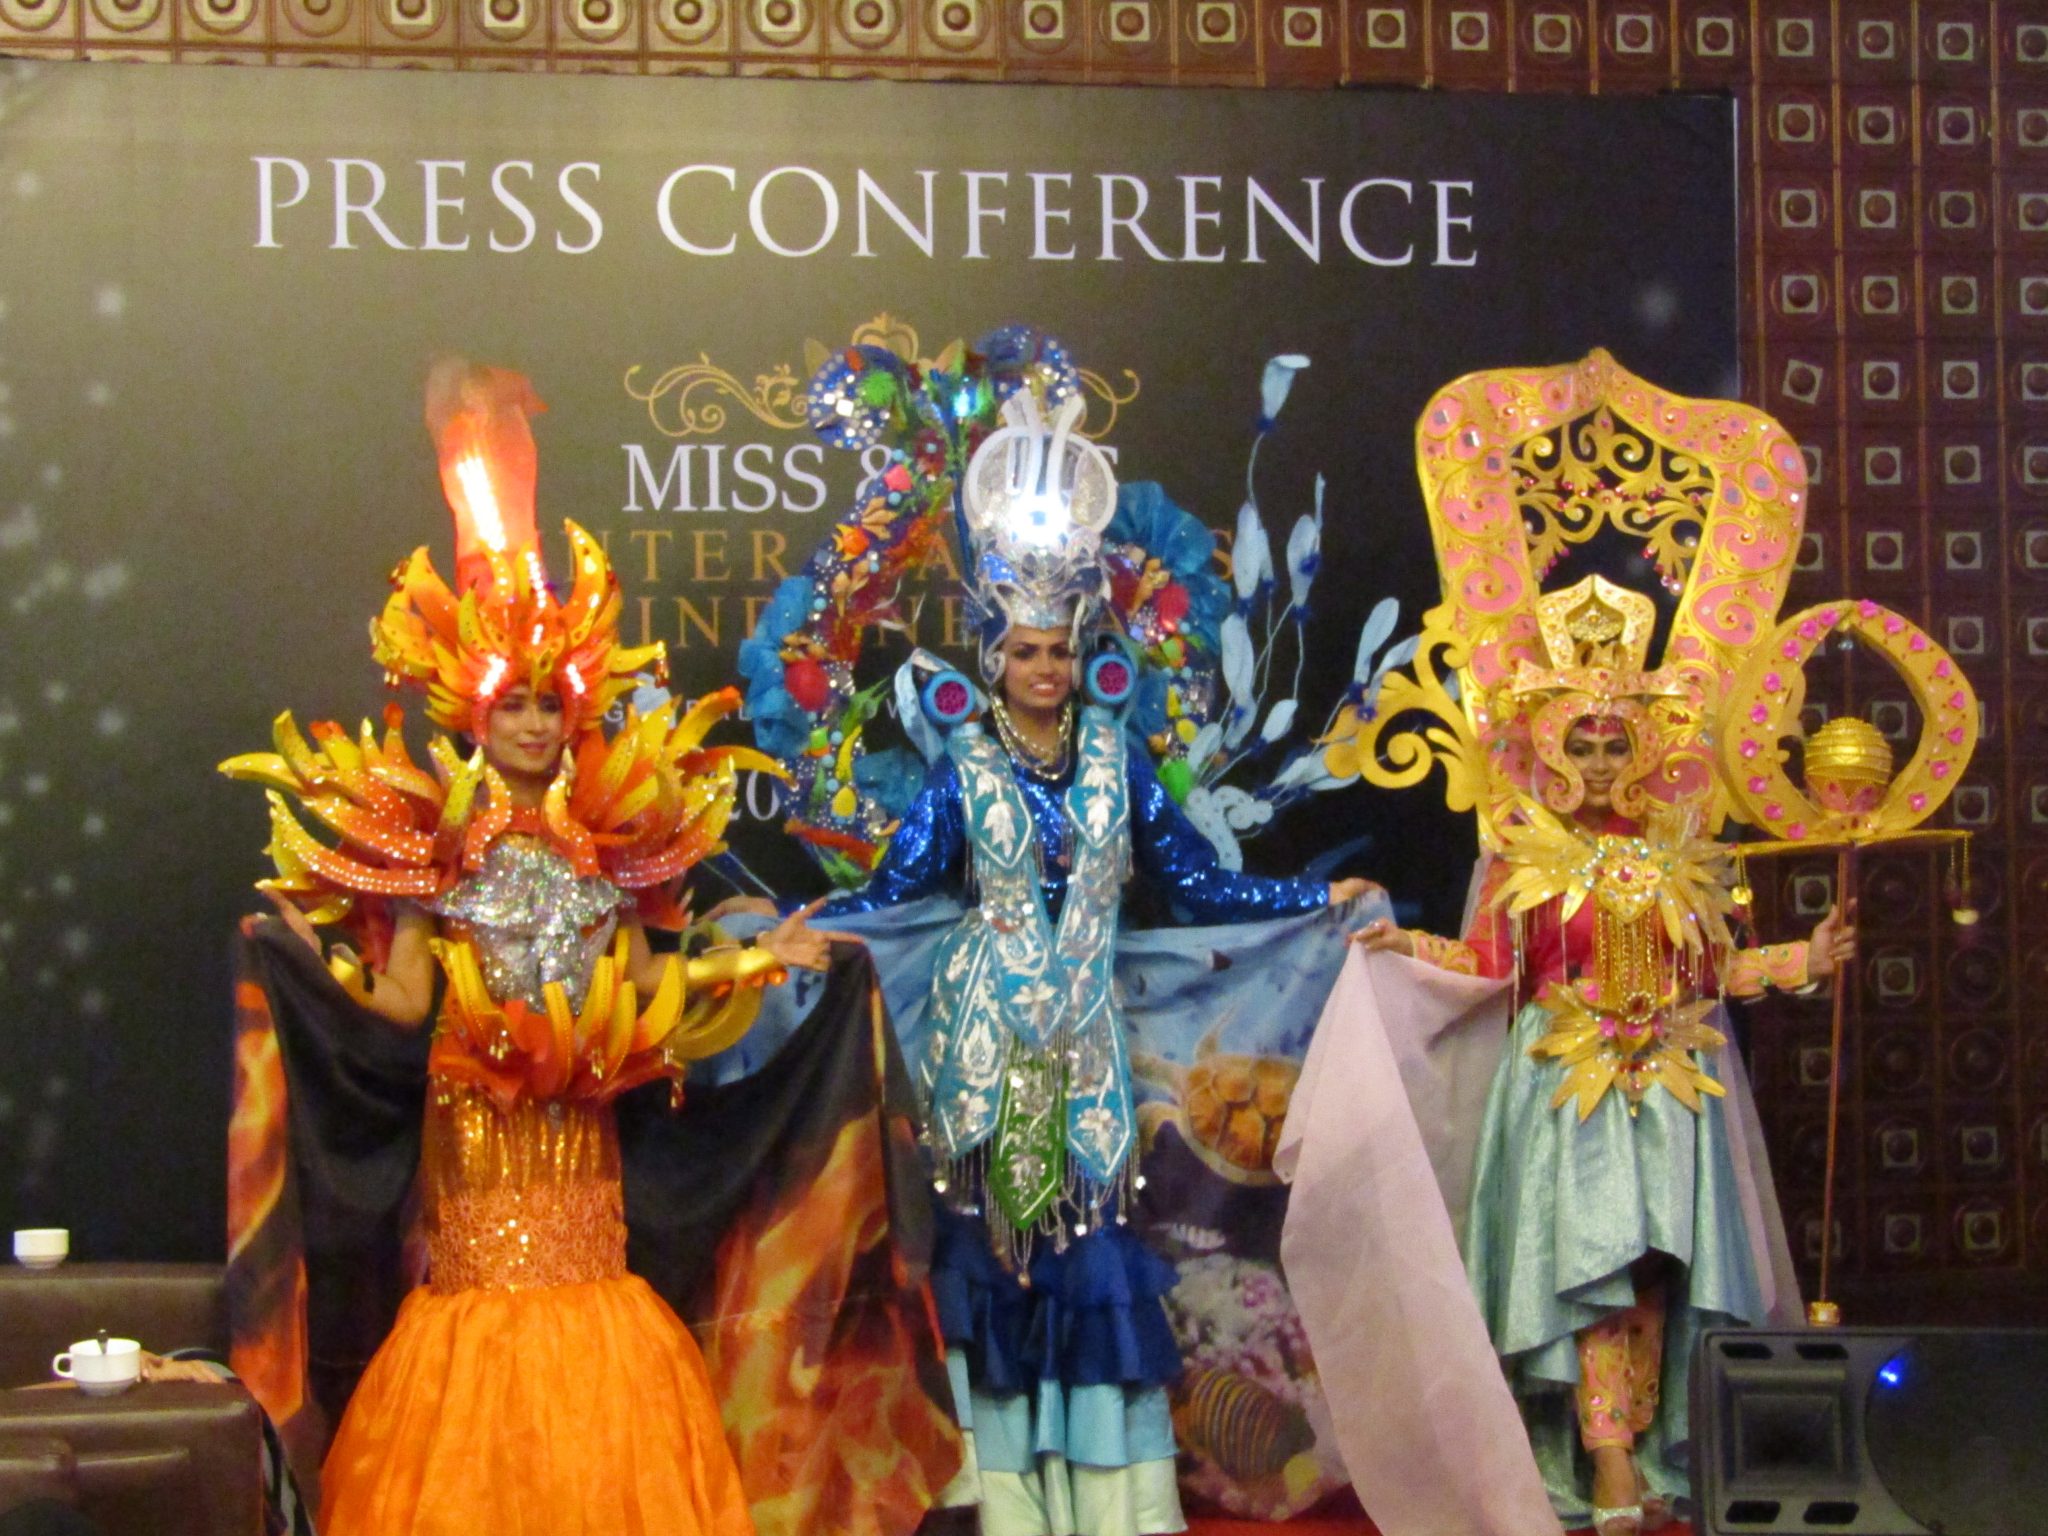 The 3 contestants in costumes by designer Nabil Cartyn Carnival